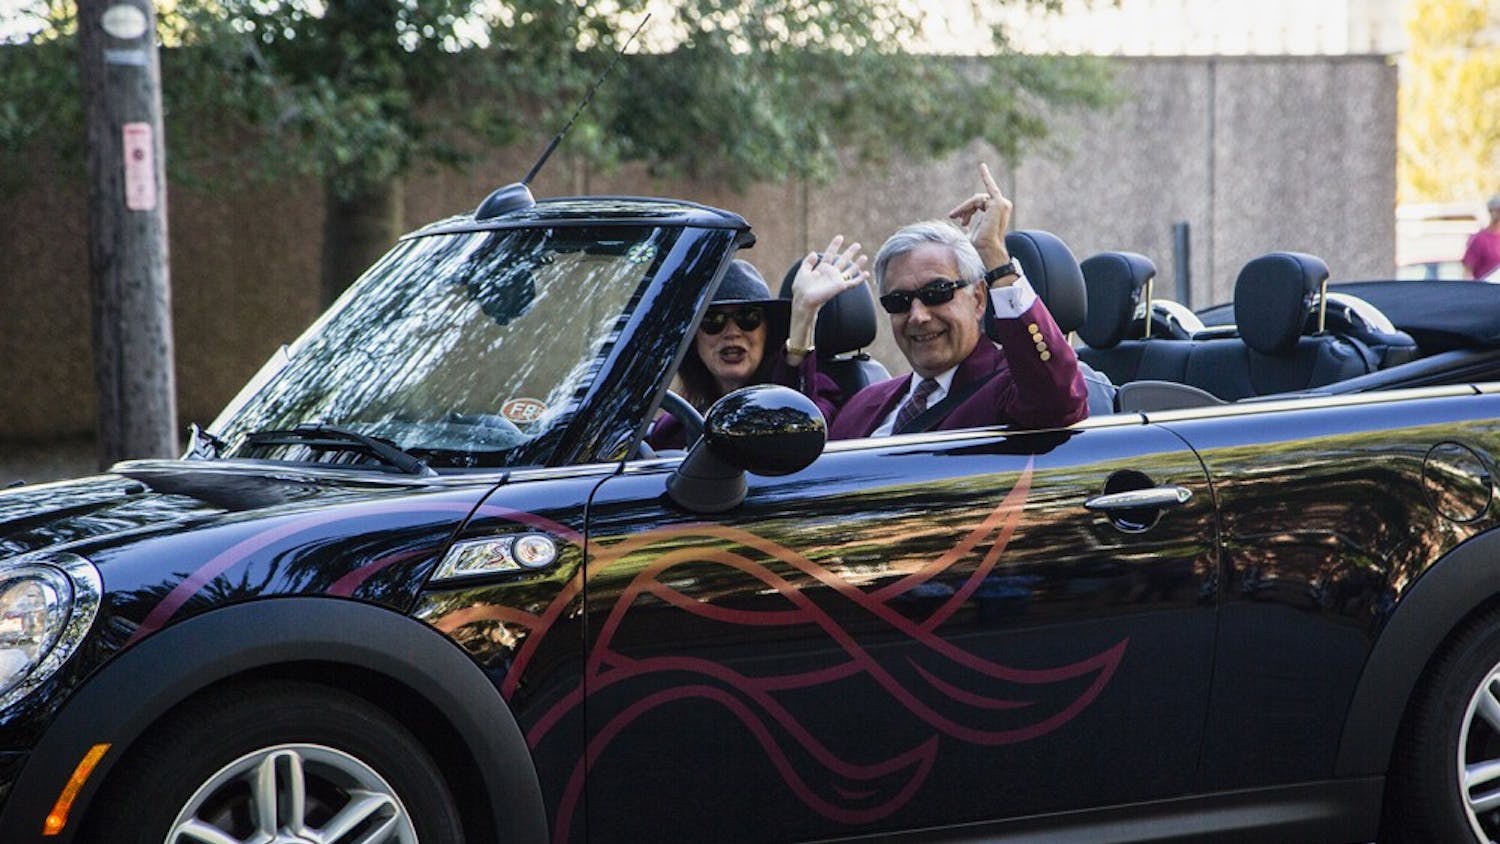 President Emeritus Harris Pastides and his wife Patricia Moore-Pastides ride in a car in the 2017 Homecoming parade.